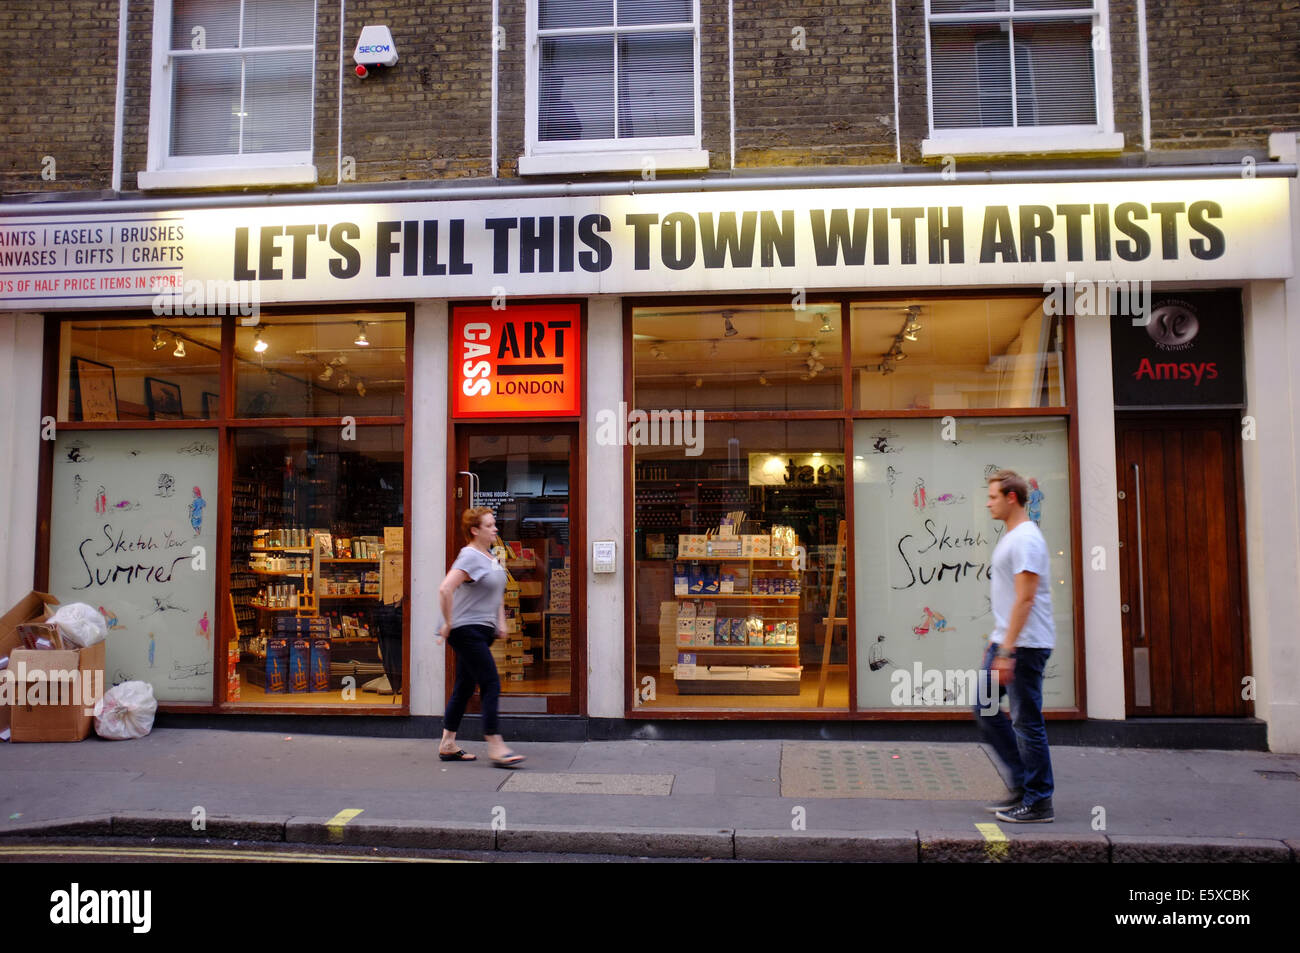 Art supplies shop in Soho called 'LET'S FILL THIS TOWN WITH ARTISTS' Stock Photo